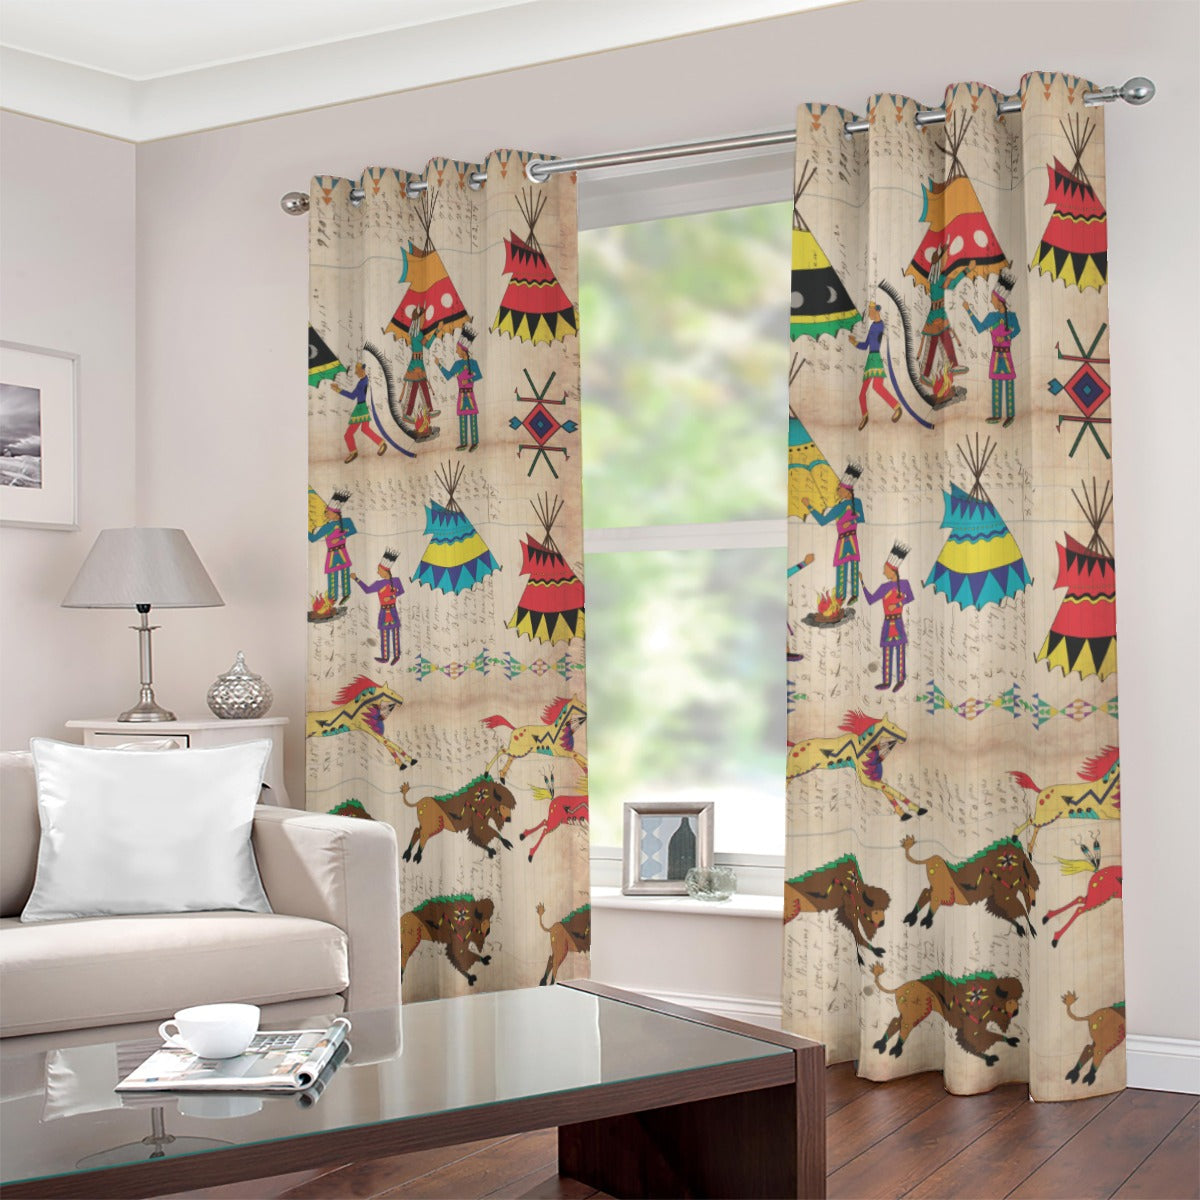 The Gathering Window Blackout Curtain  (42 inch x 45 inch)